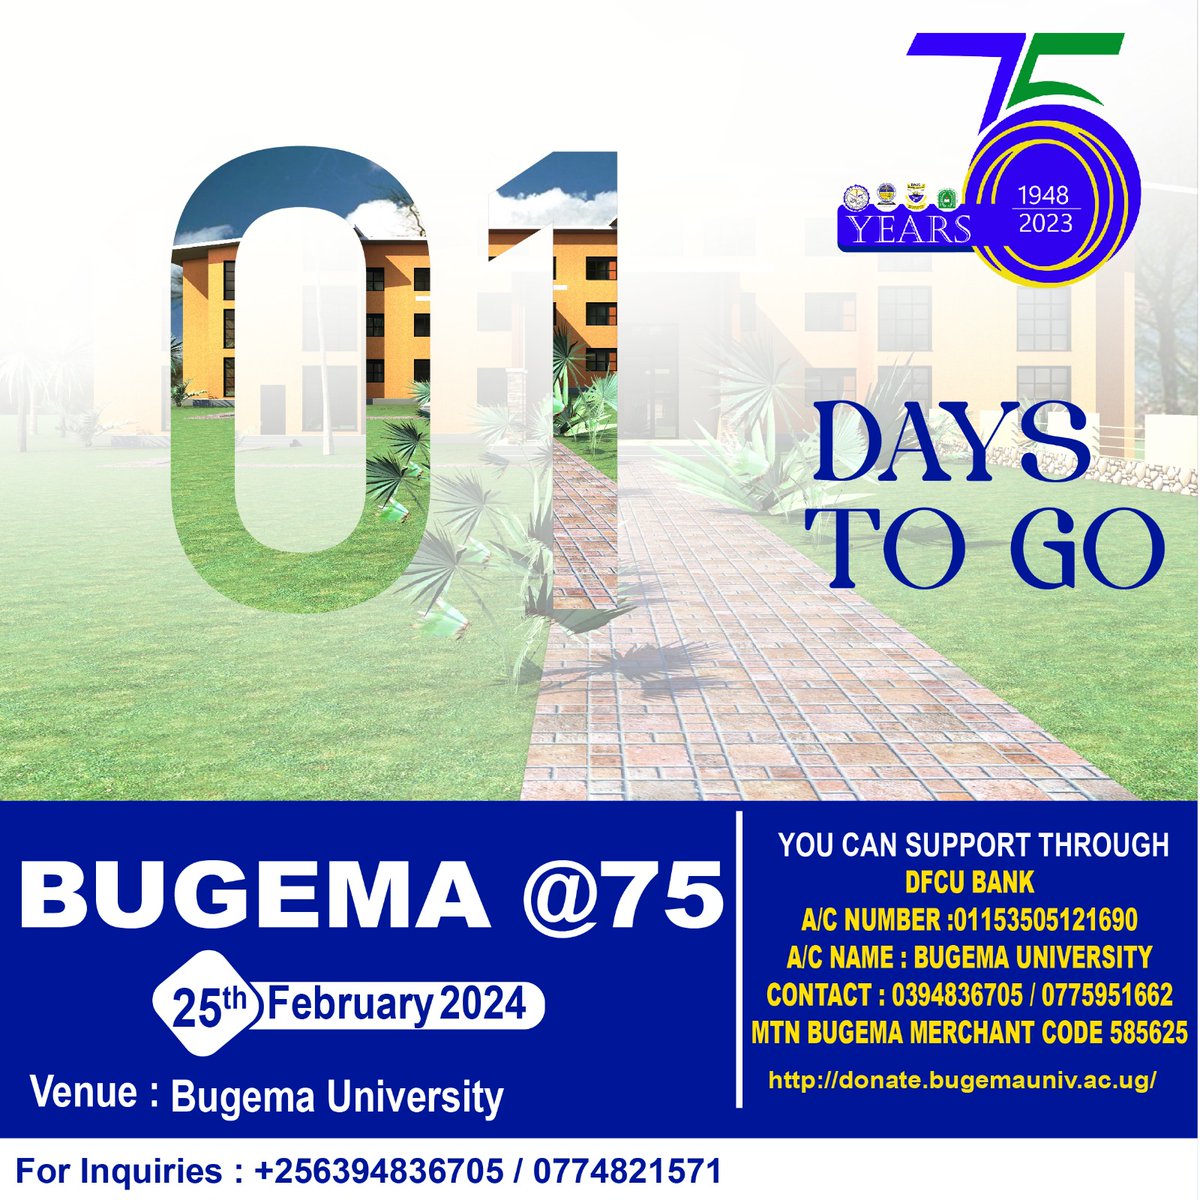 #Bugema@75 One day to go 🎊